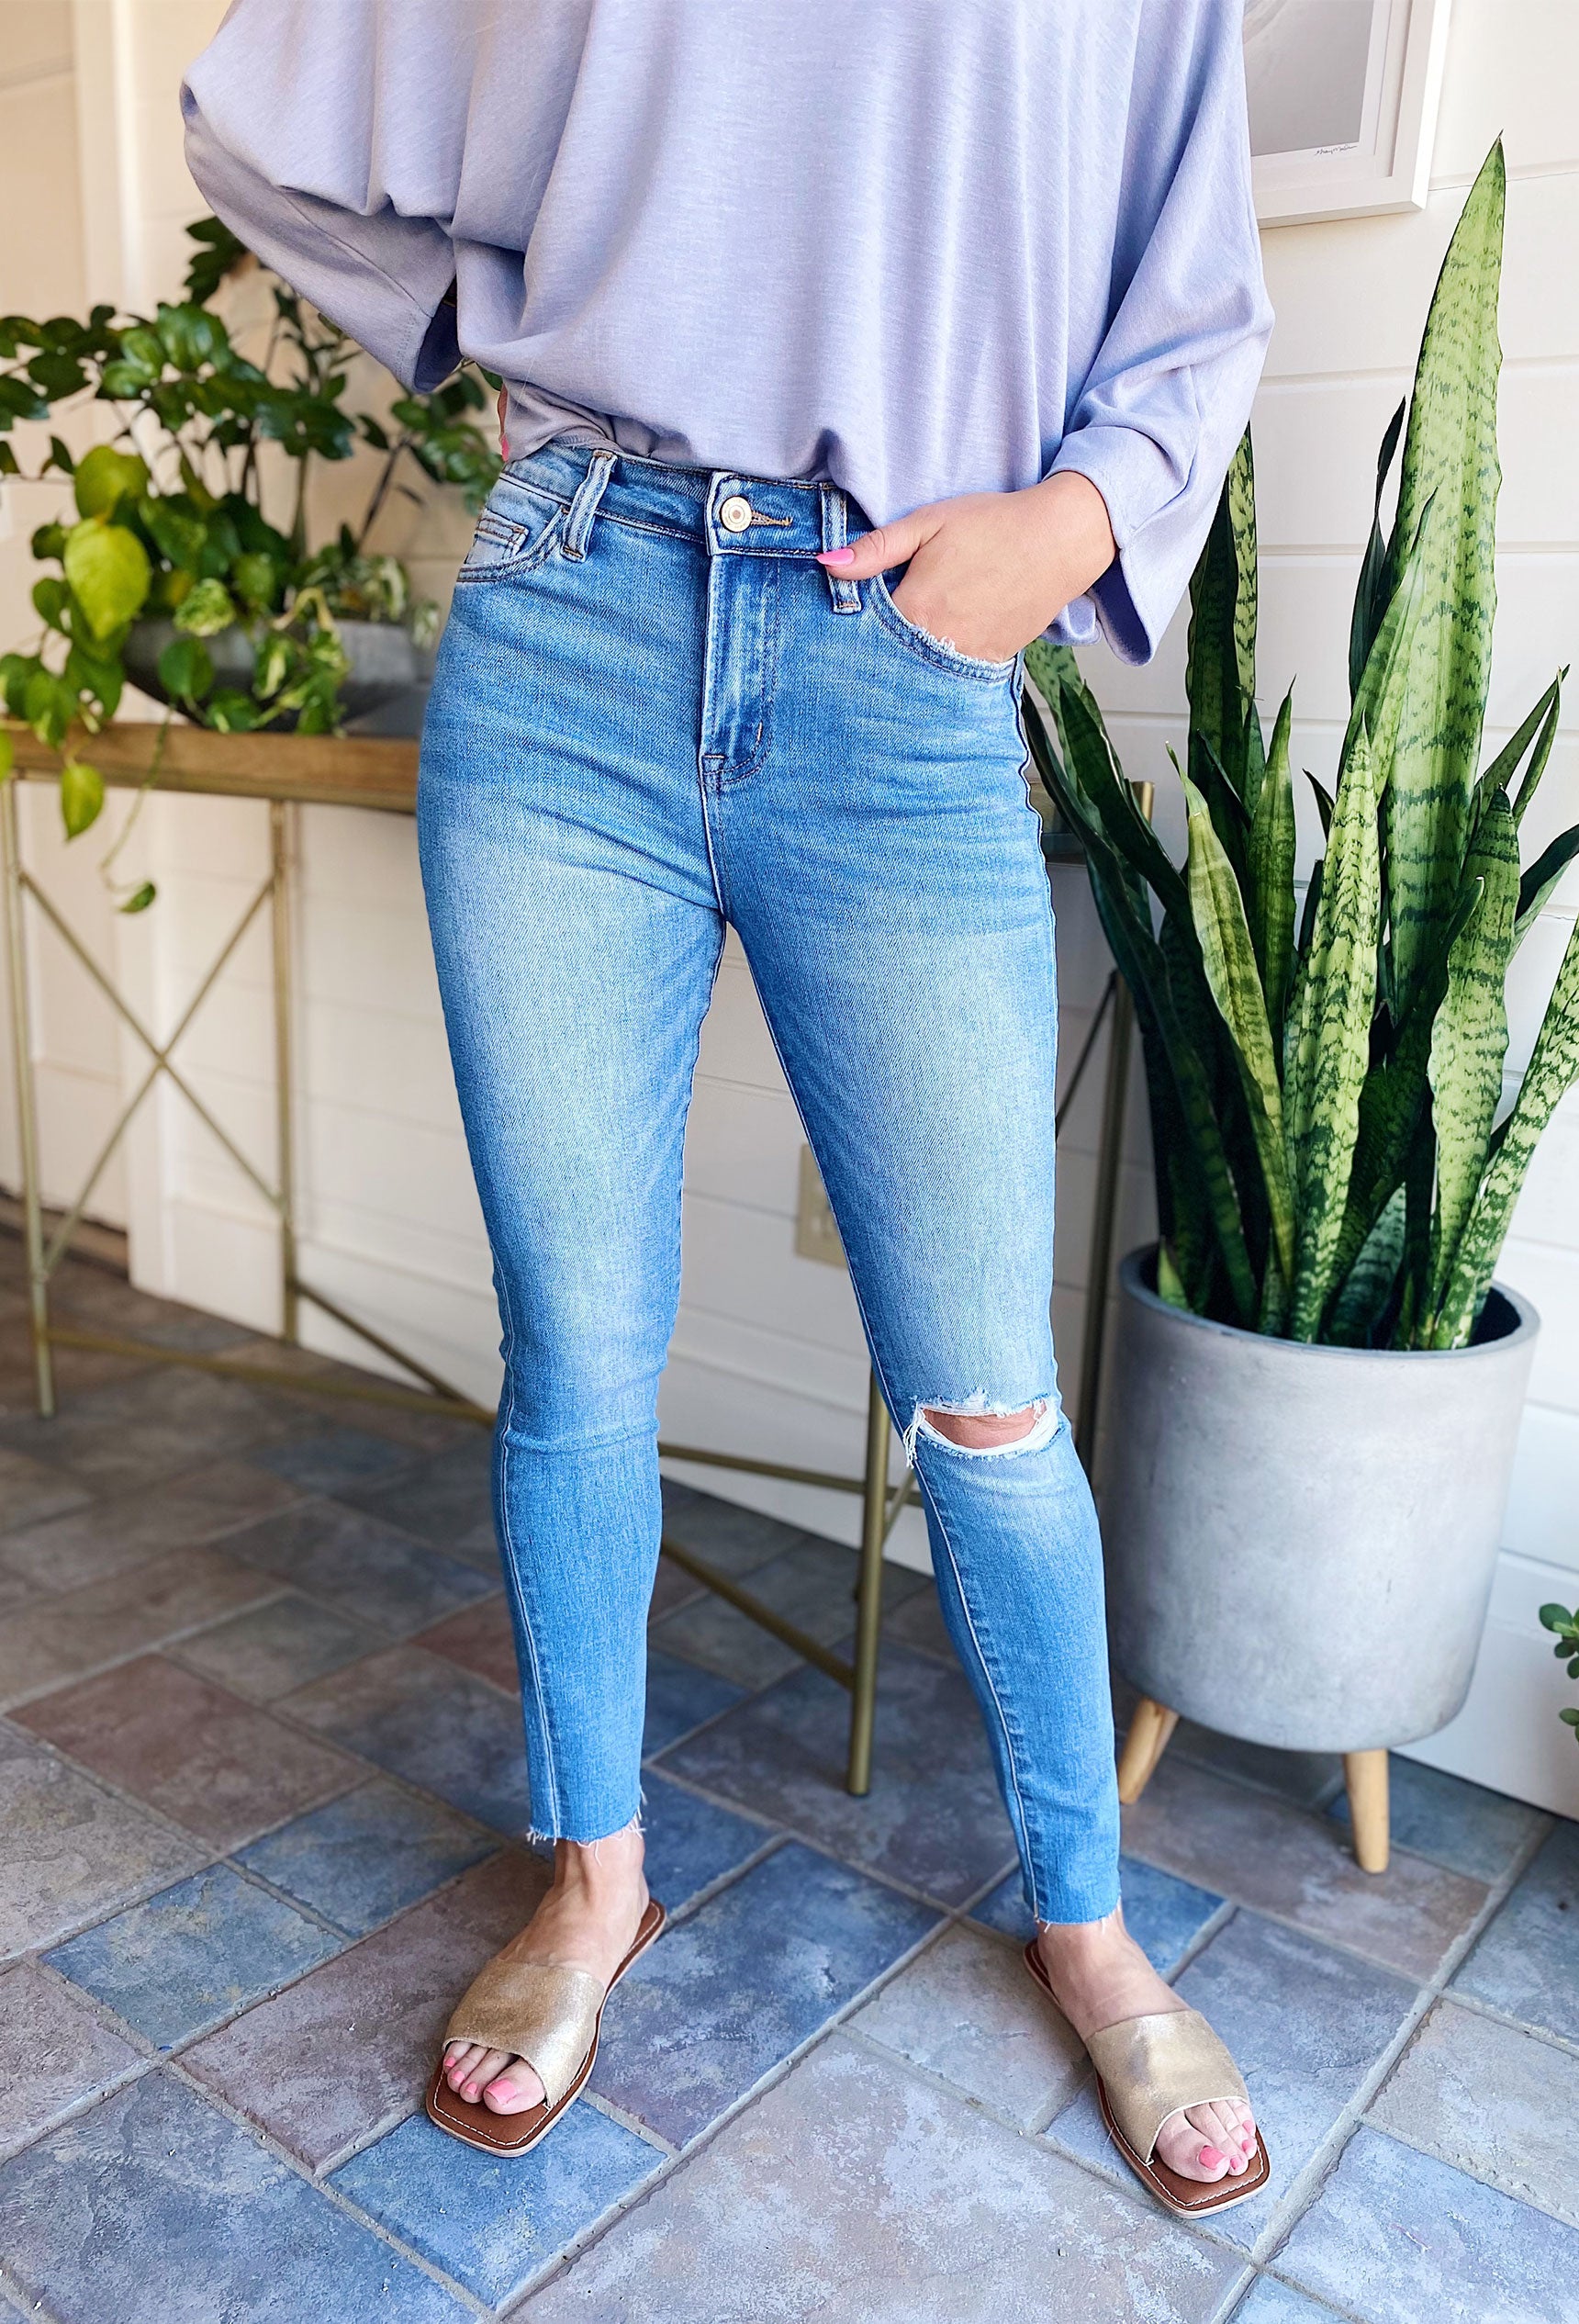 High Rise Crop Skinny Jeans by Vervet, light washed skinny jeans with knee distressing 